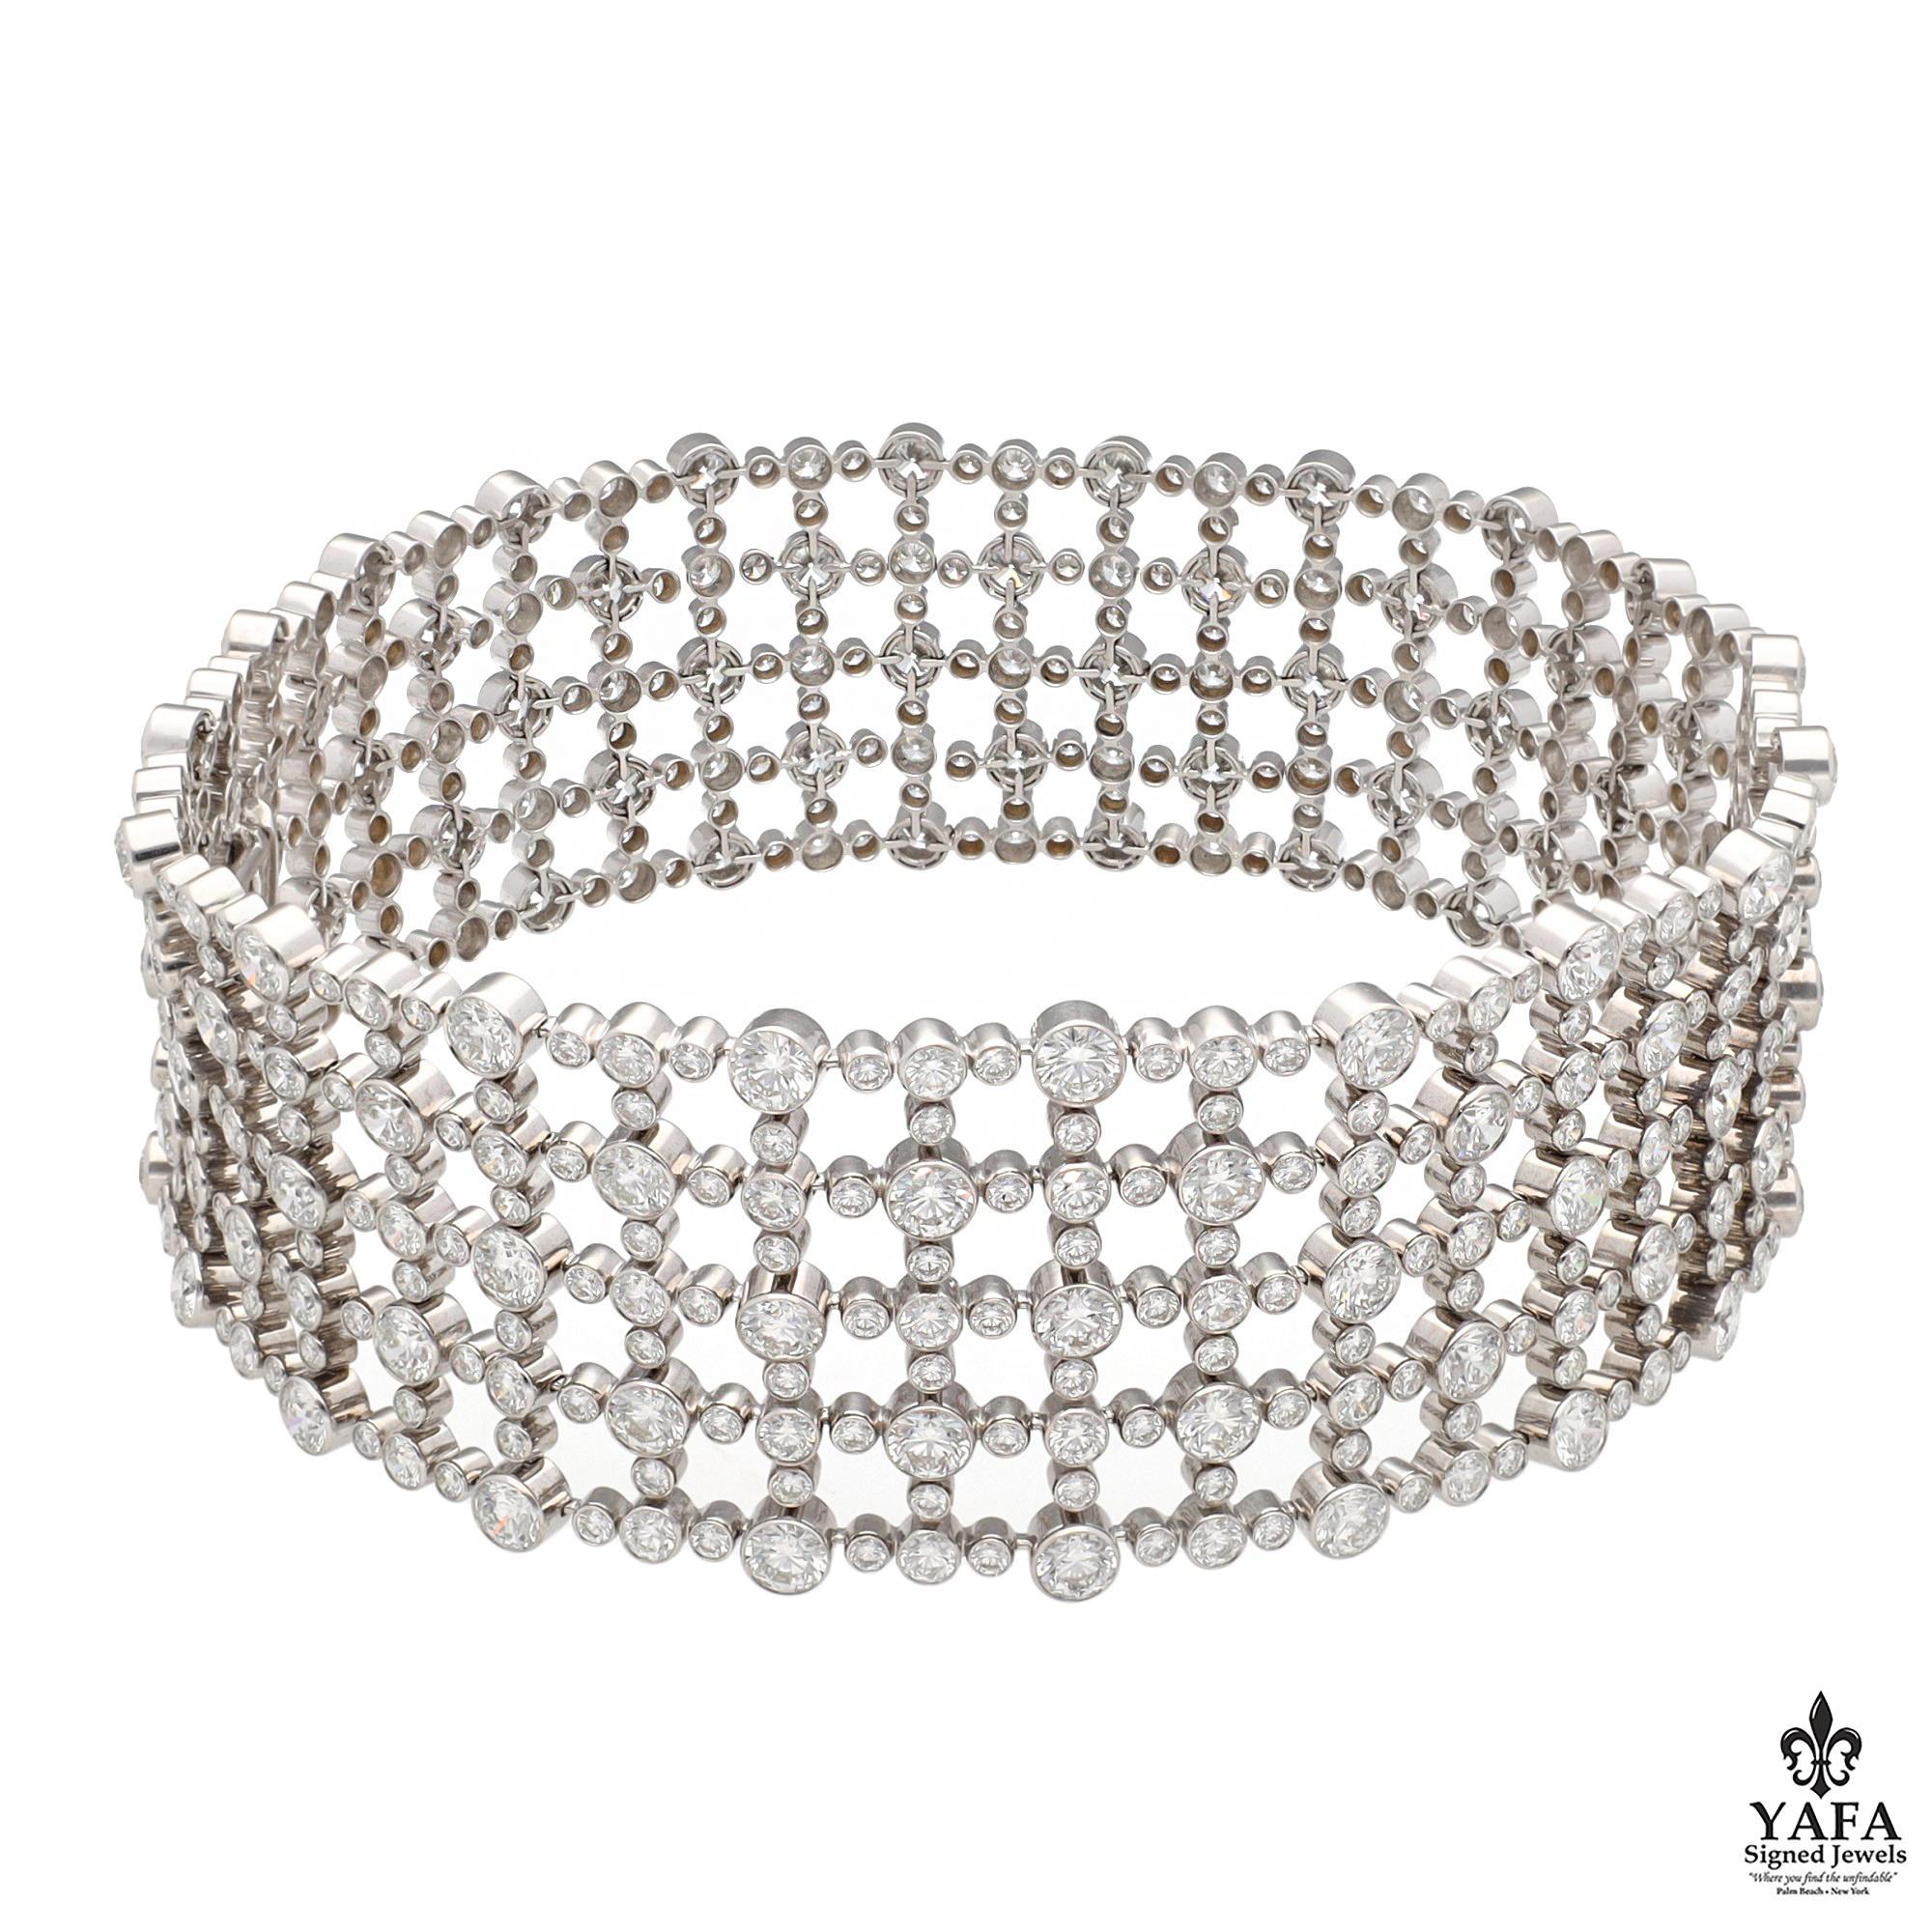 Harry Winston 5 Row Latus Motif Diamond Bracelet - Set of Two In Excellent Condition For Sale In New York, NY